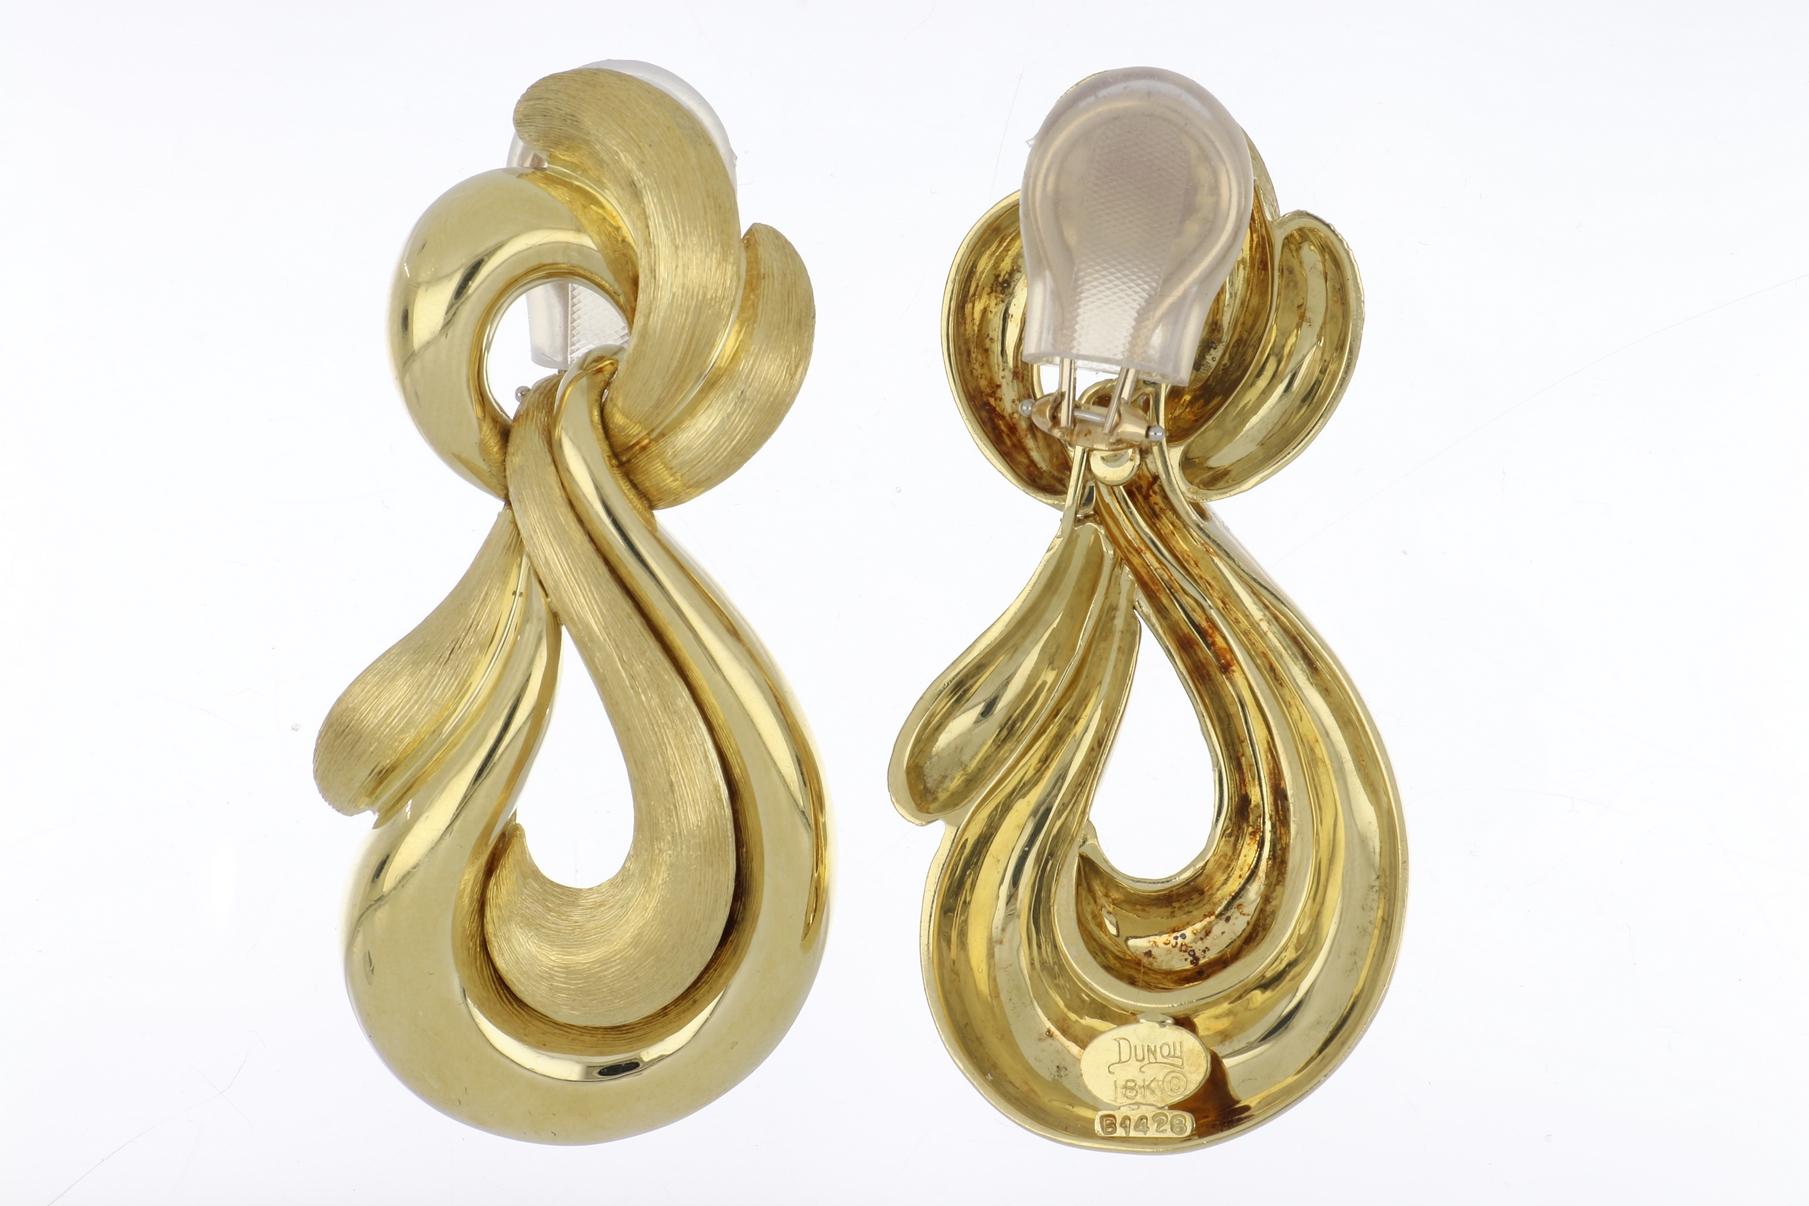 Estate Henry Dunay 18K yellow gold doorknocker earrings in both the Sabi finish and a high polish finish.  A fluid design that measures 2 1/4 inches long and 1 1/4 inches at the widest point.  These earrings have a clip backs and no posts.